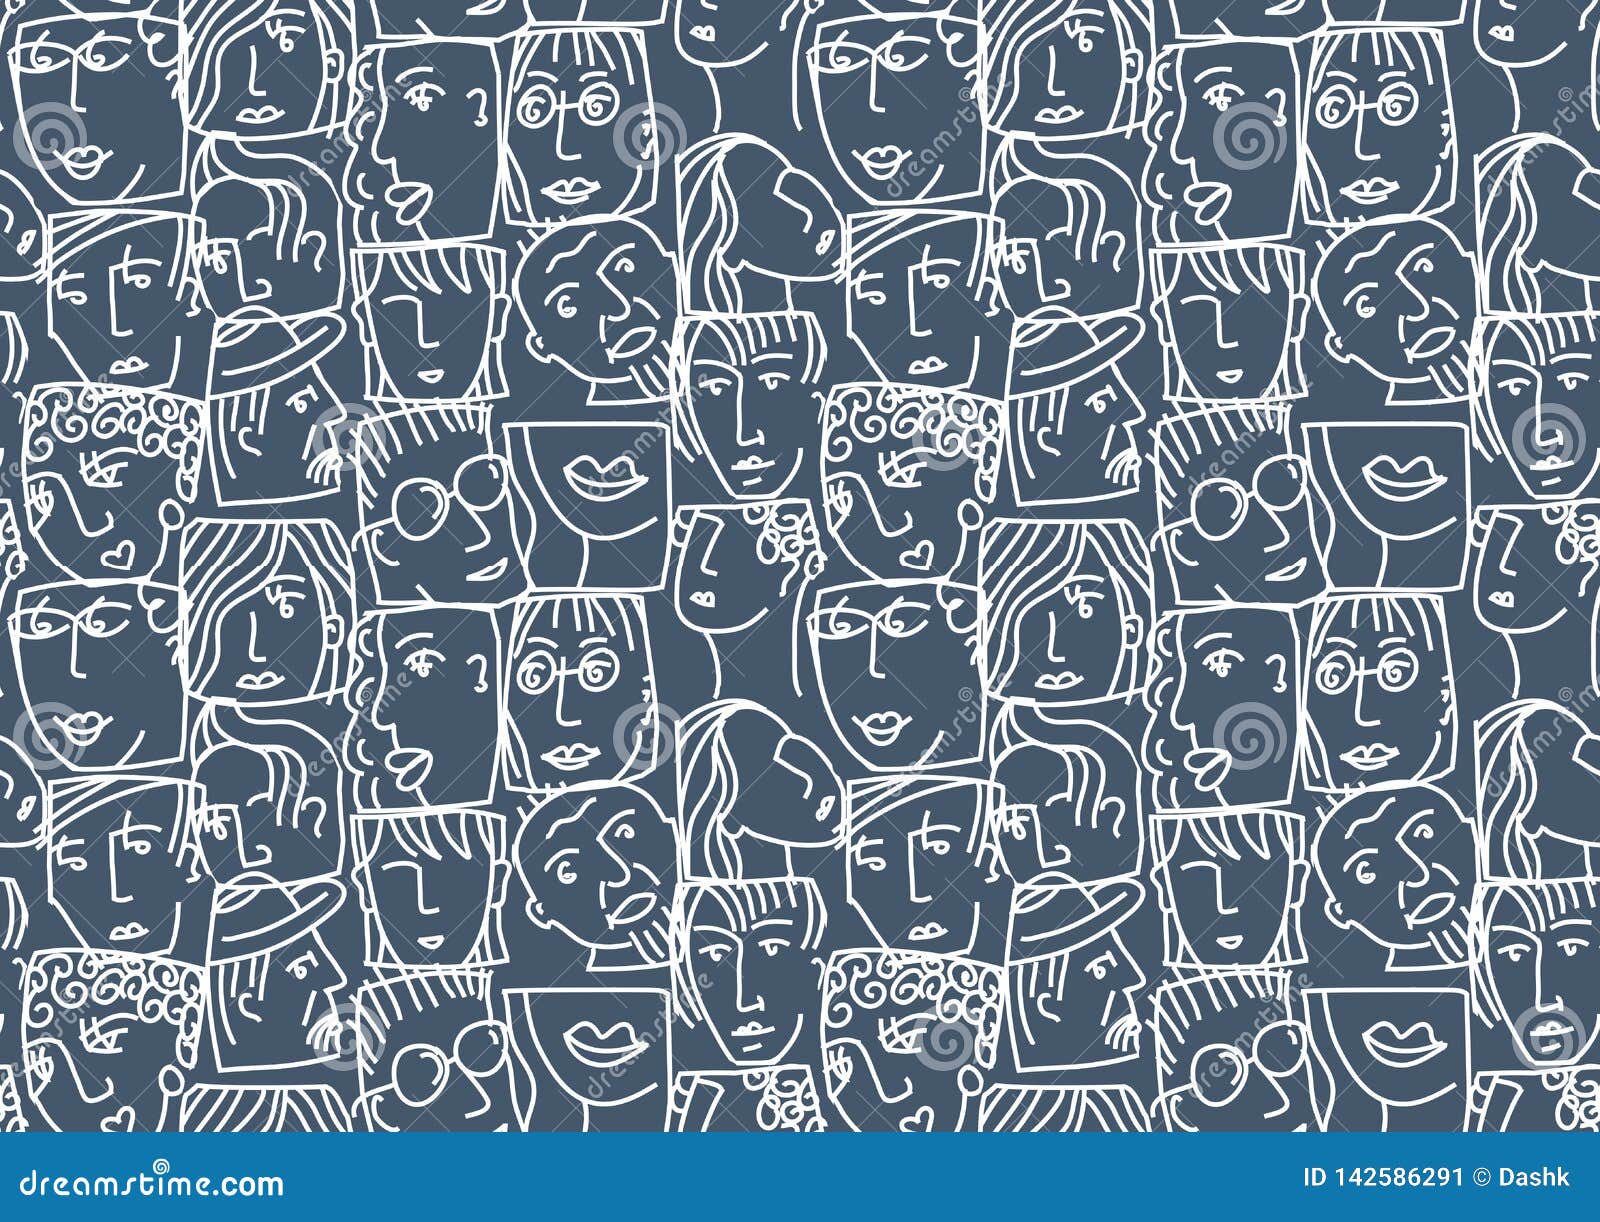 people abstract faces avatars characters invert seamless pattern